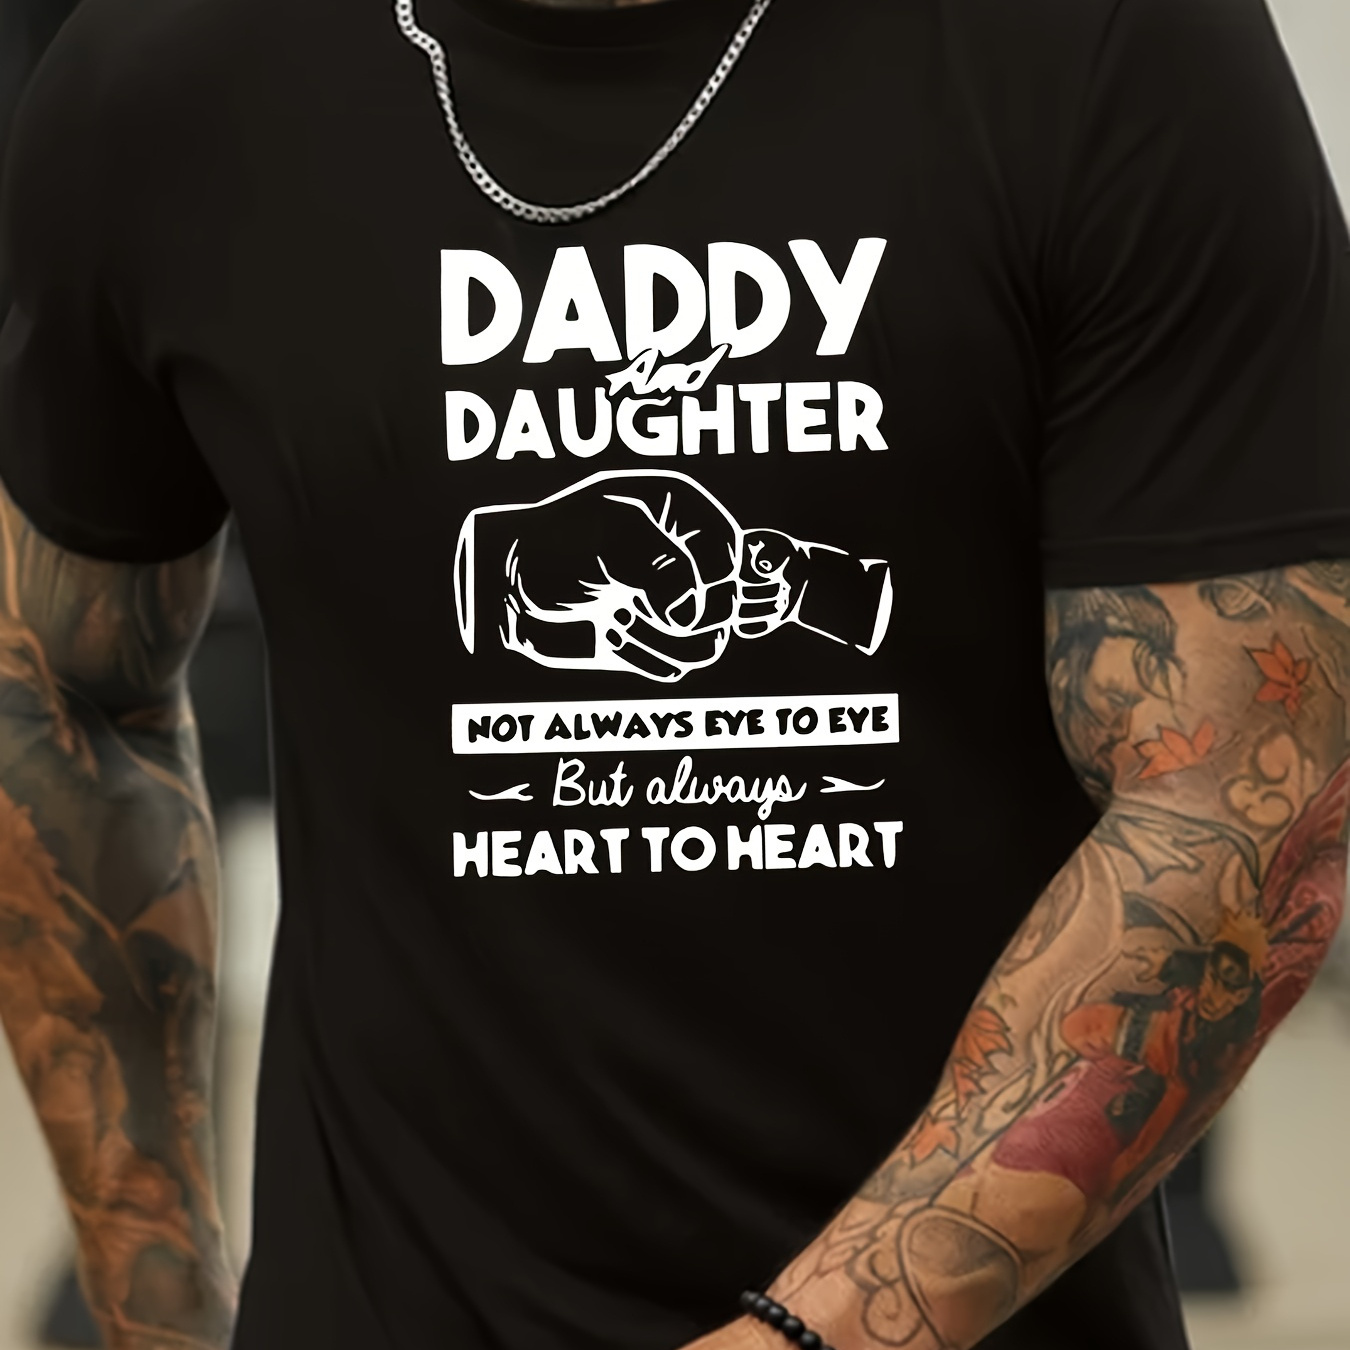 

1 Pc, 100% Cotton T-shirt, Father's Day Daddy Print Men's Short Sleeve T-shirts, Comfy Casual Breathable Tops For Men's Fitness Training, Jogging, Outdoor Activities Summer